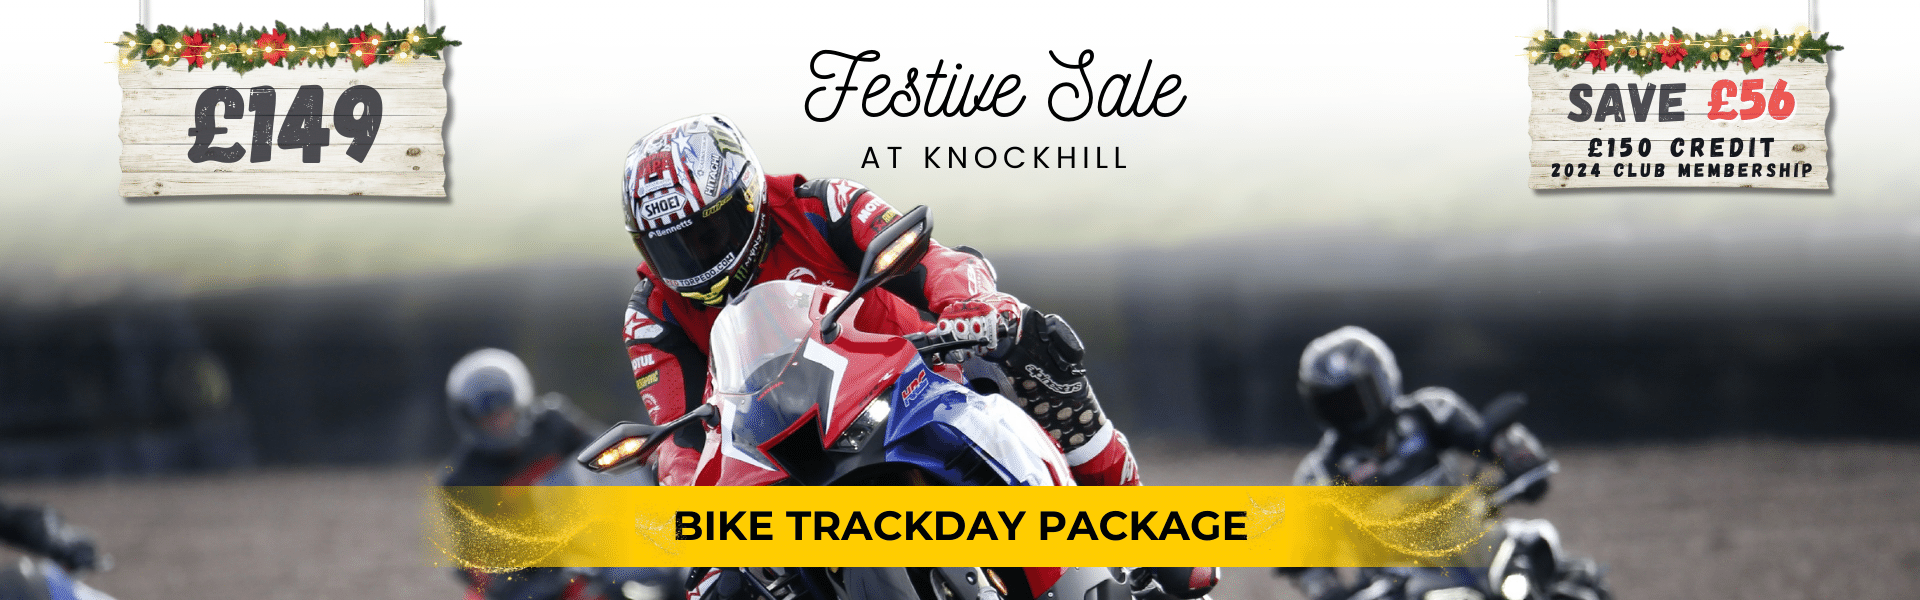 Bike Trackday Package with £150 credit